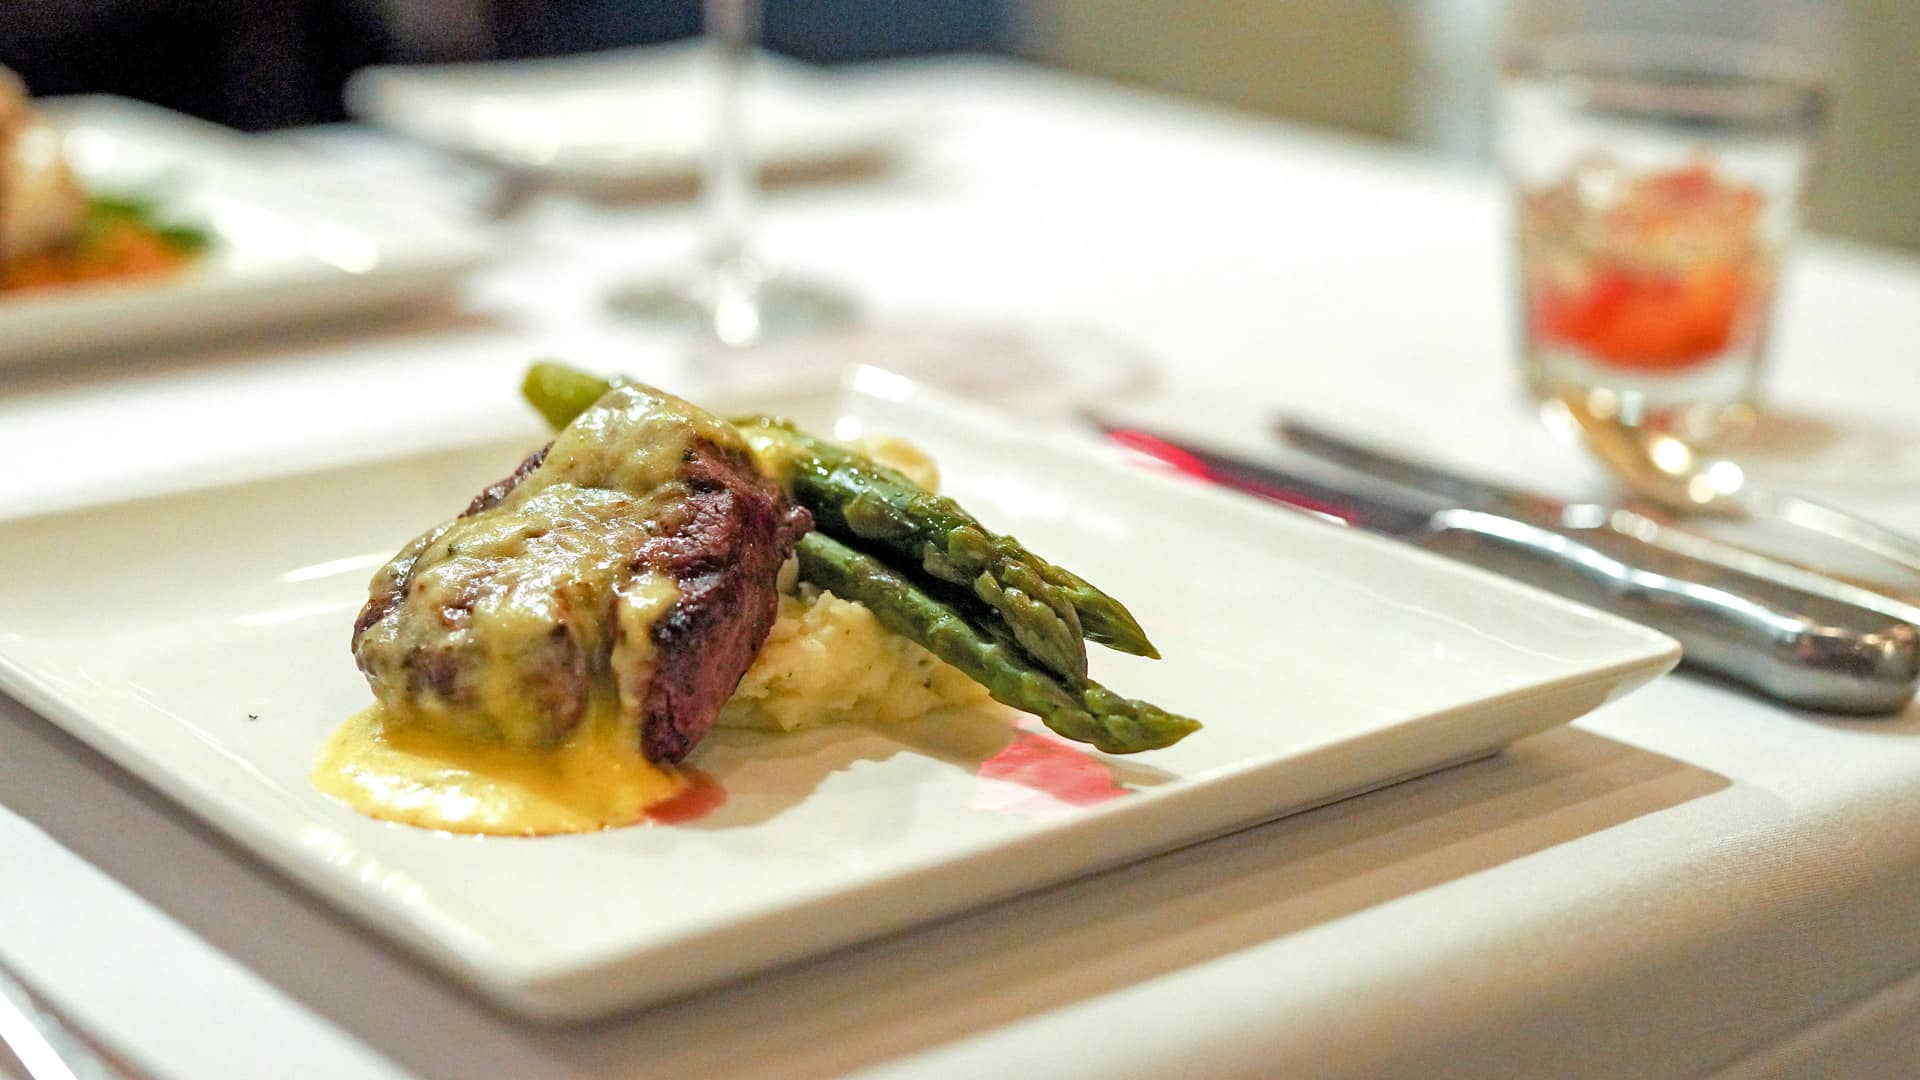 Close-up photo of catered meal from the Metropolitan Club with a steak on a bed of mashed potatoes and asparagus on a white square plate